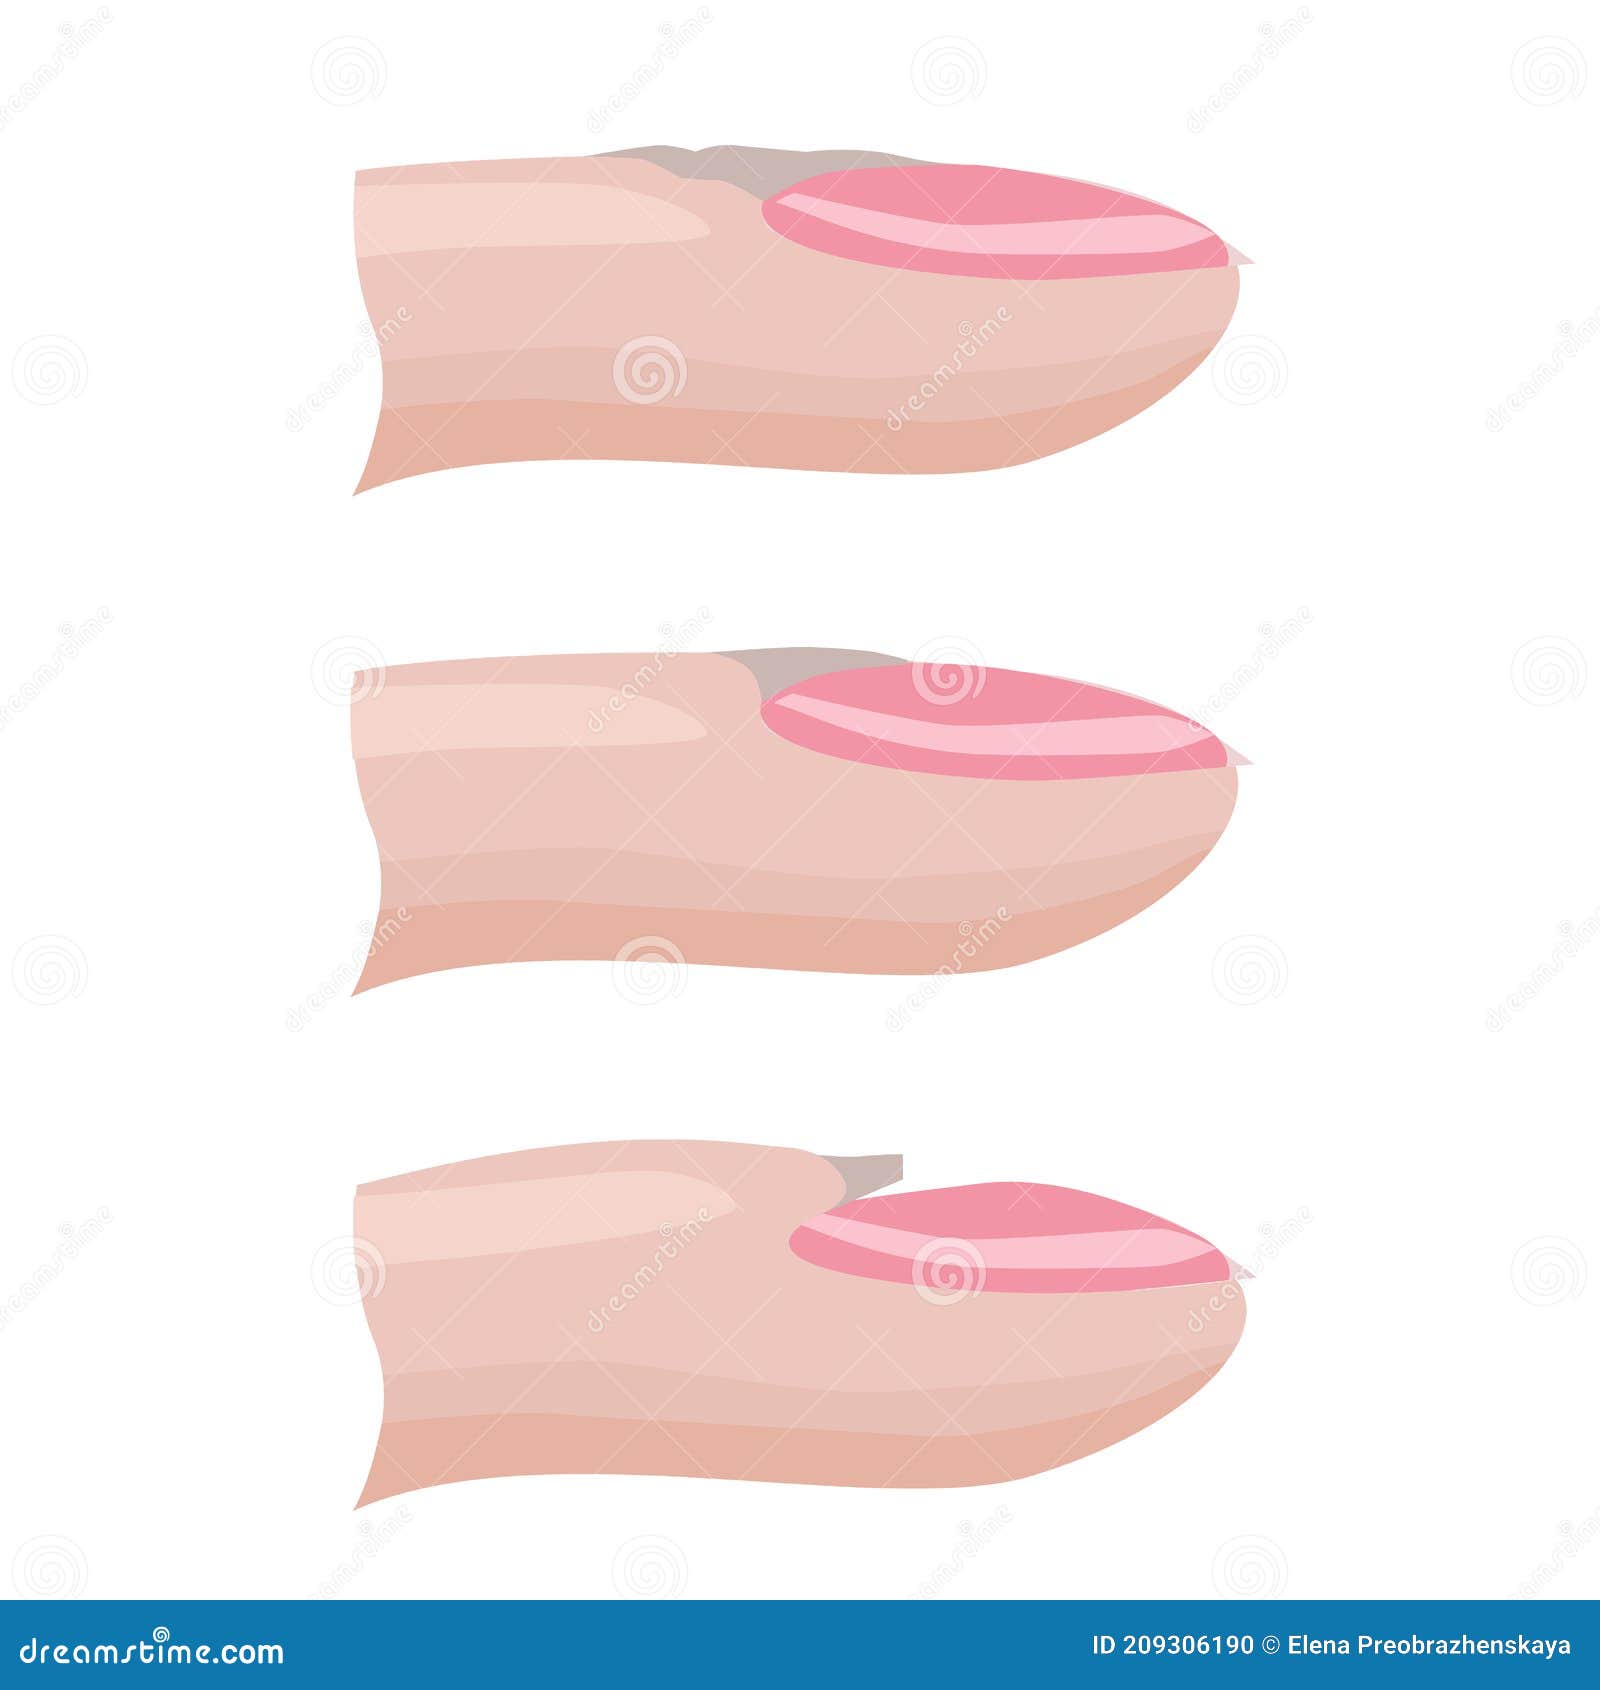 the structure of the nail, types of nail cuticle. hand nail care.  